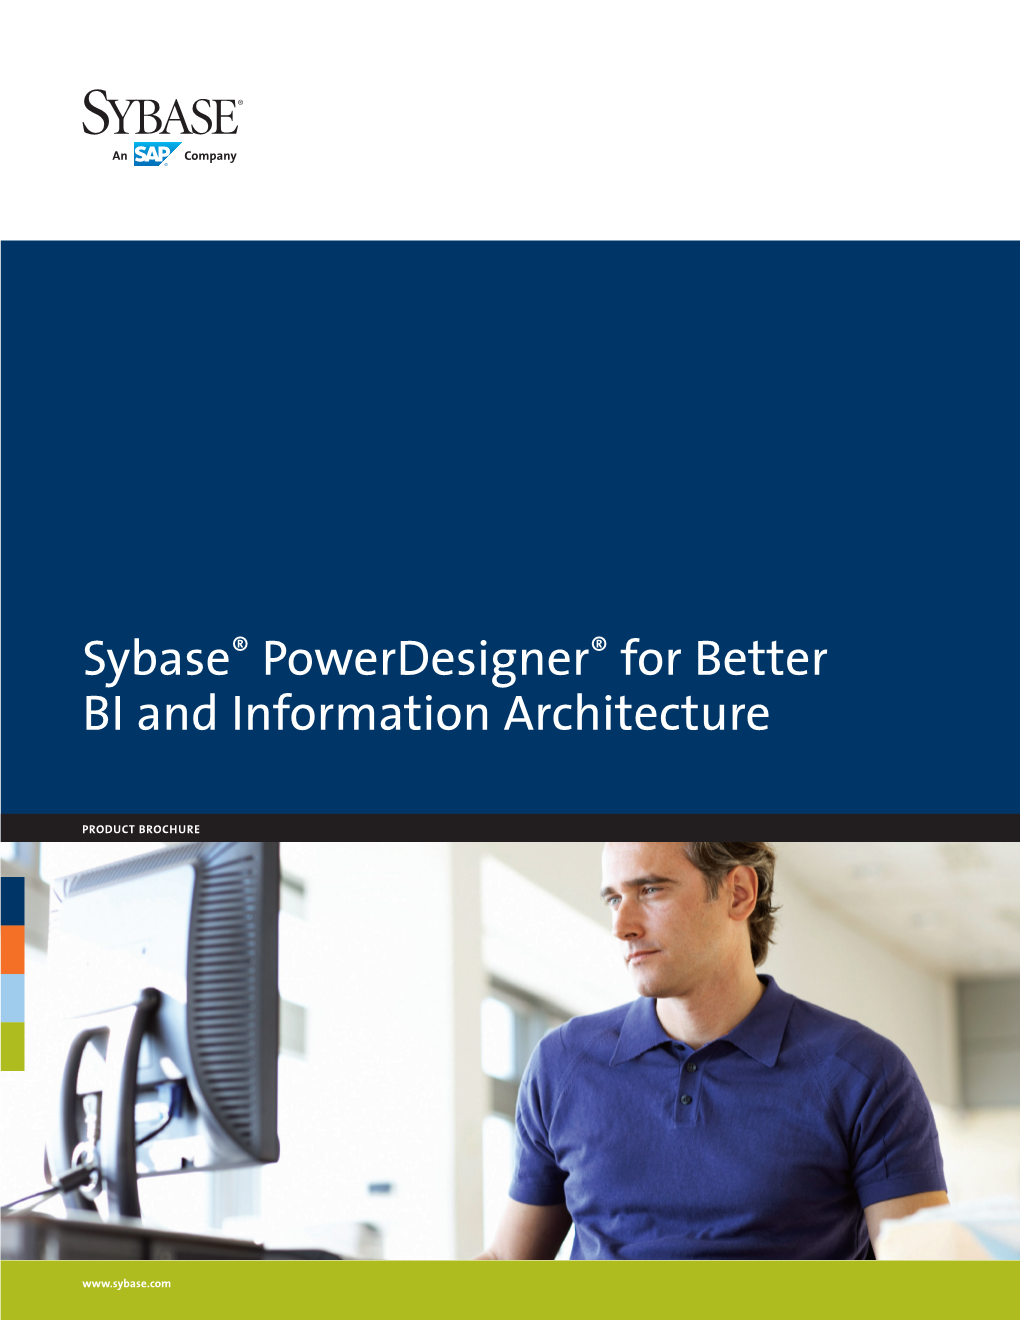 Sybase Powerdesigner for Better BI and Information Architecture